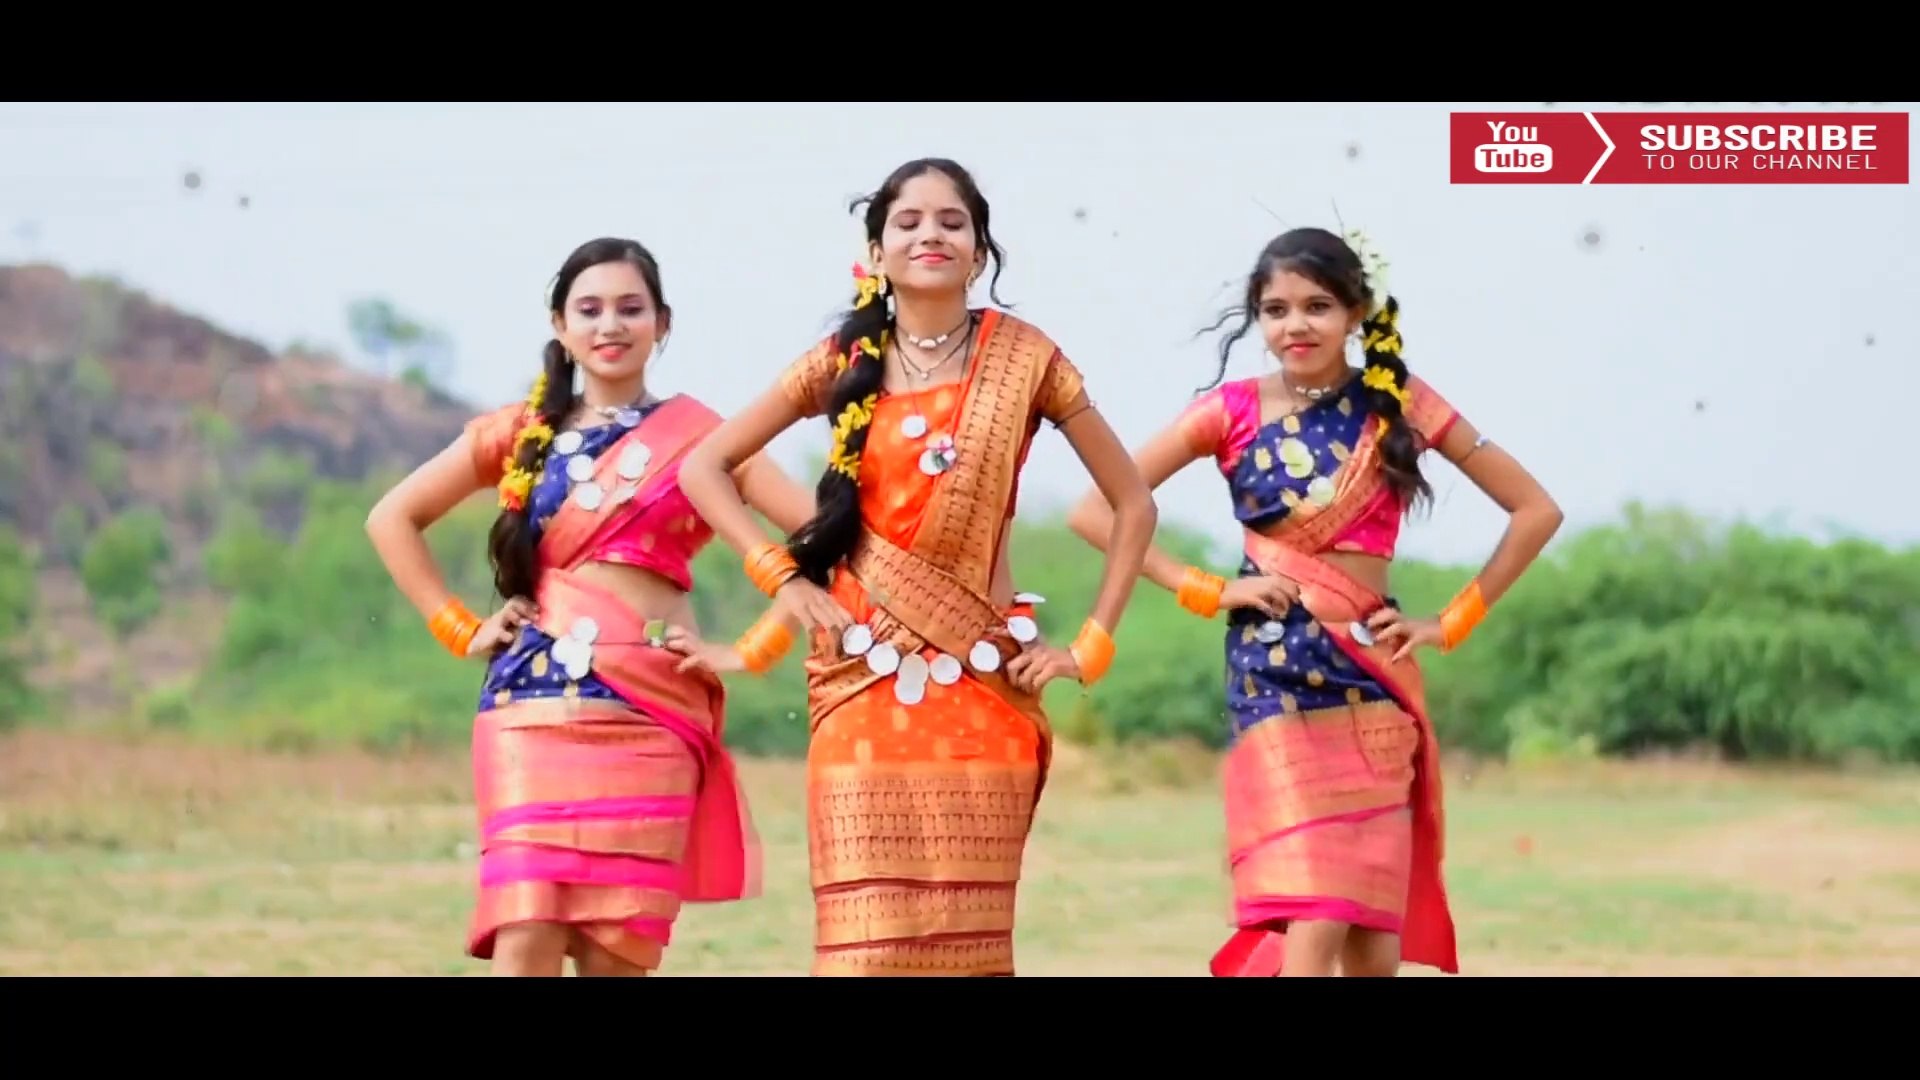 Chhattisgarhi Gana Video Offers a Spicy Look into Indian Traditional Dance!